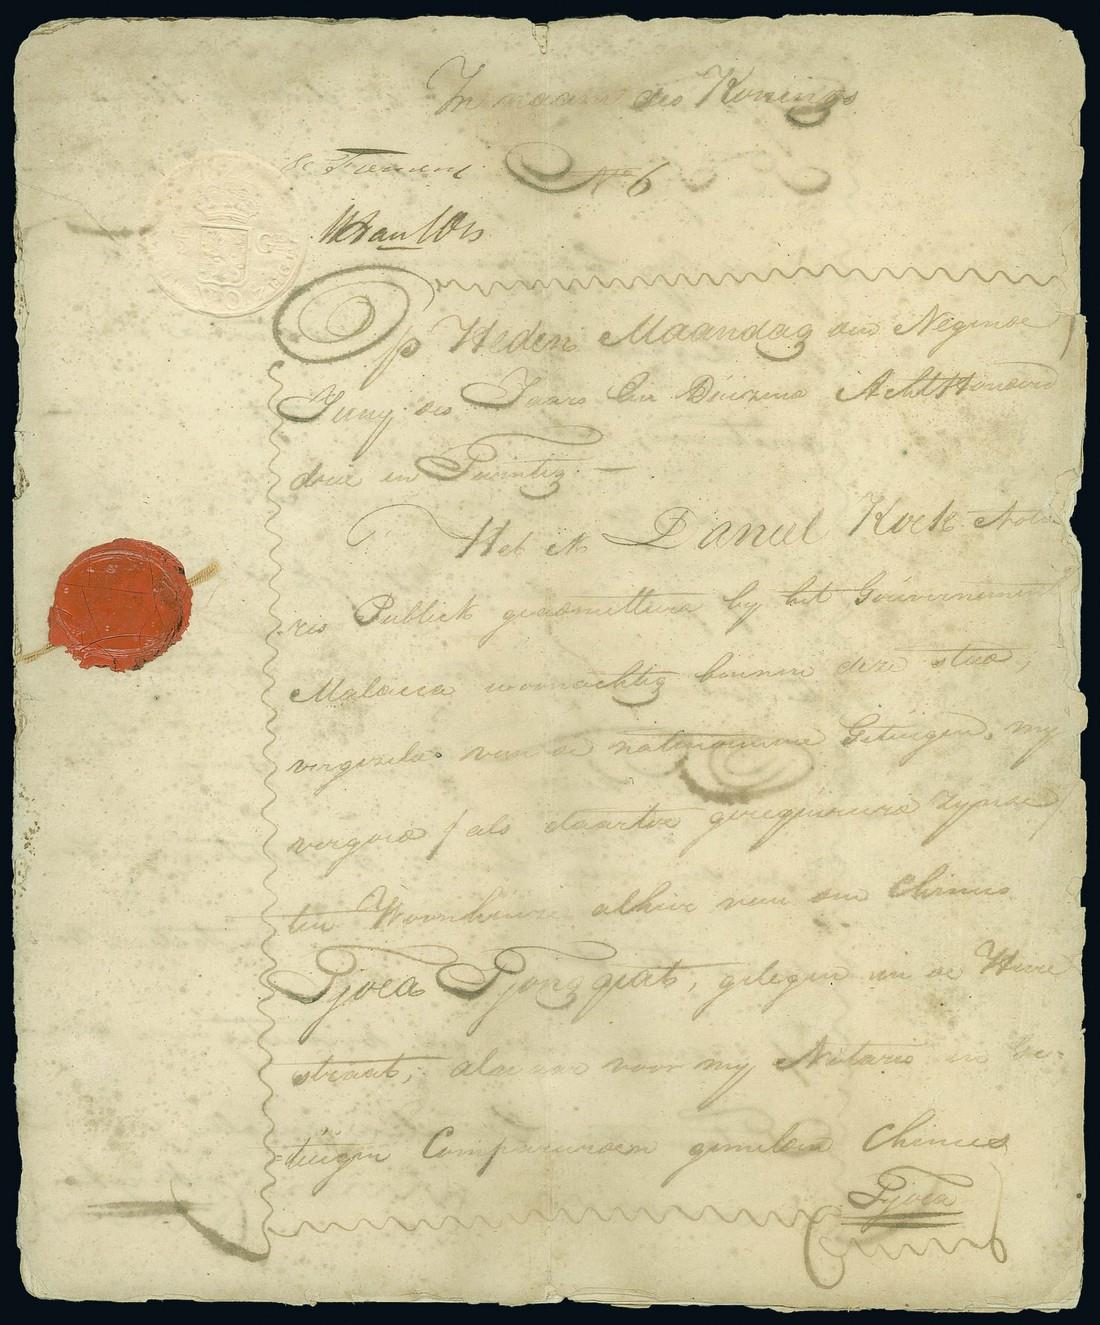 RevenuesHandstamps and Embossed Duty StampsMalacca1822 eight page document written in Dutch being